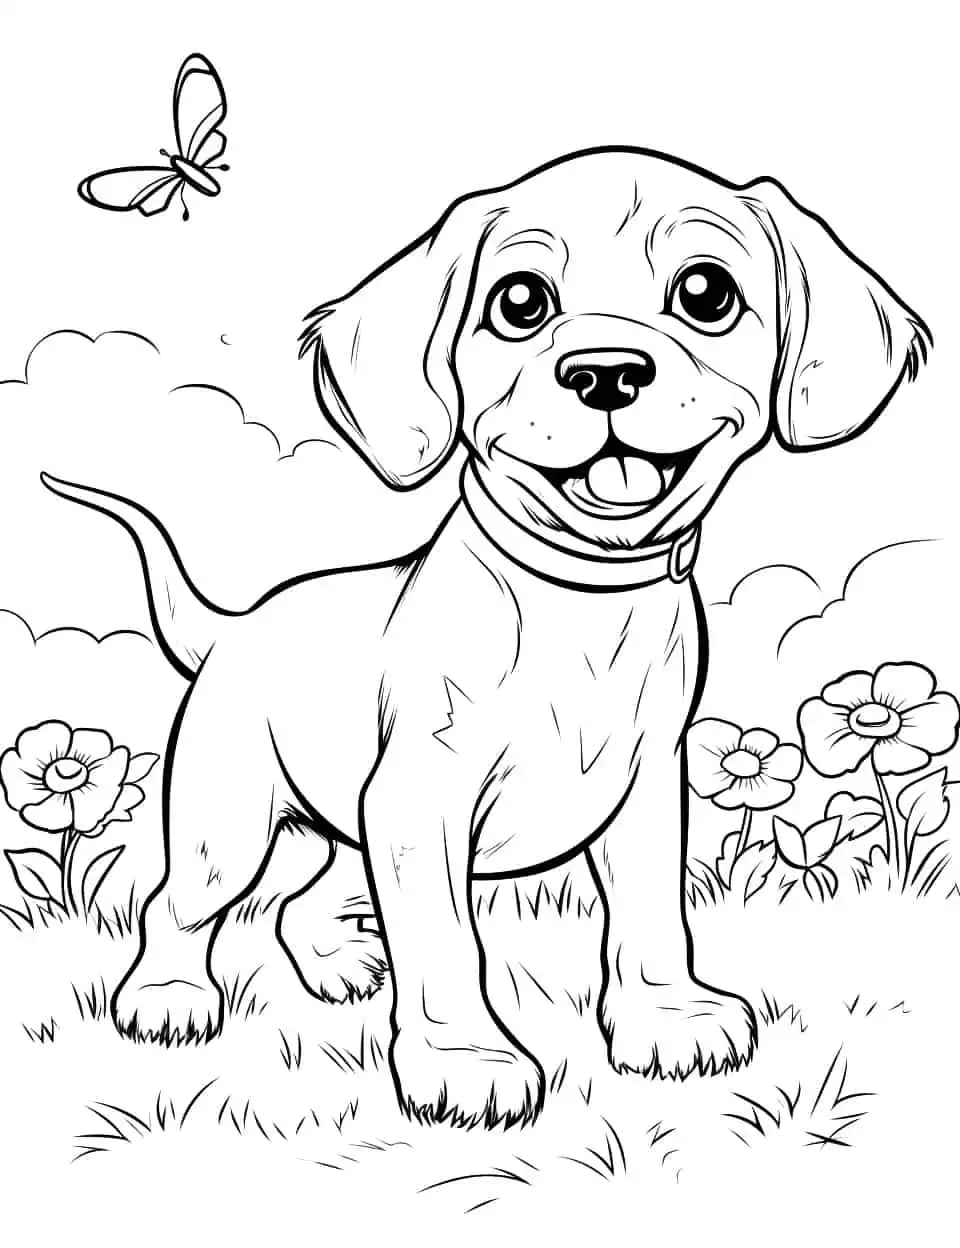 Playful Beagle Coloring Page - A playful Beagle chasing a butterfly across a park.